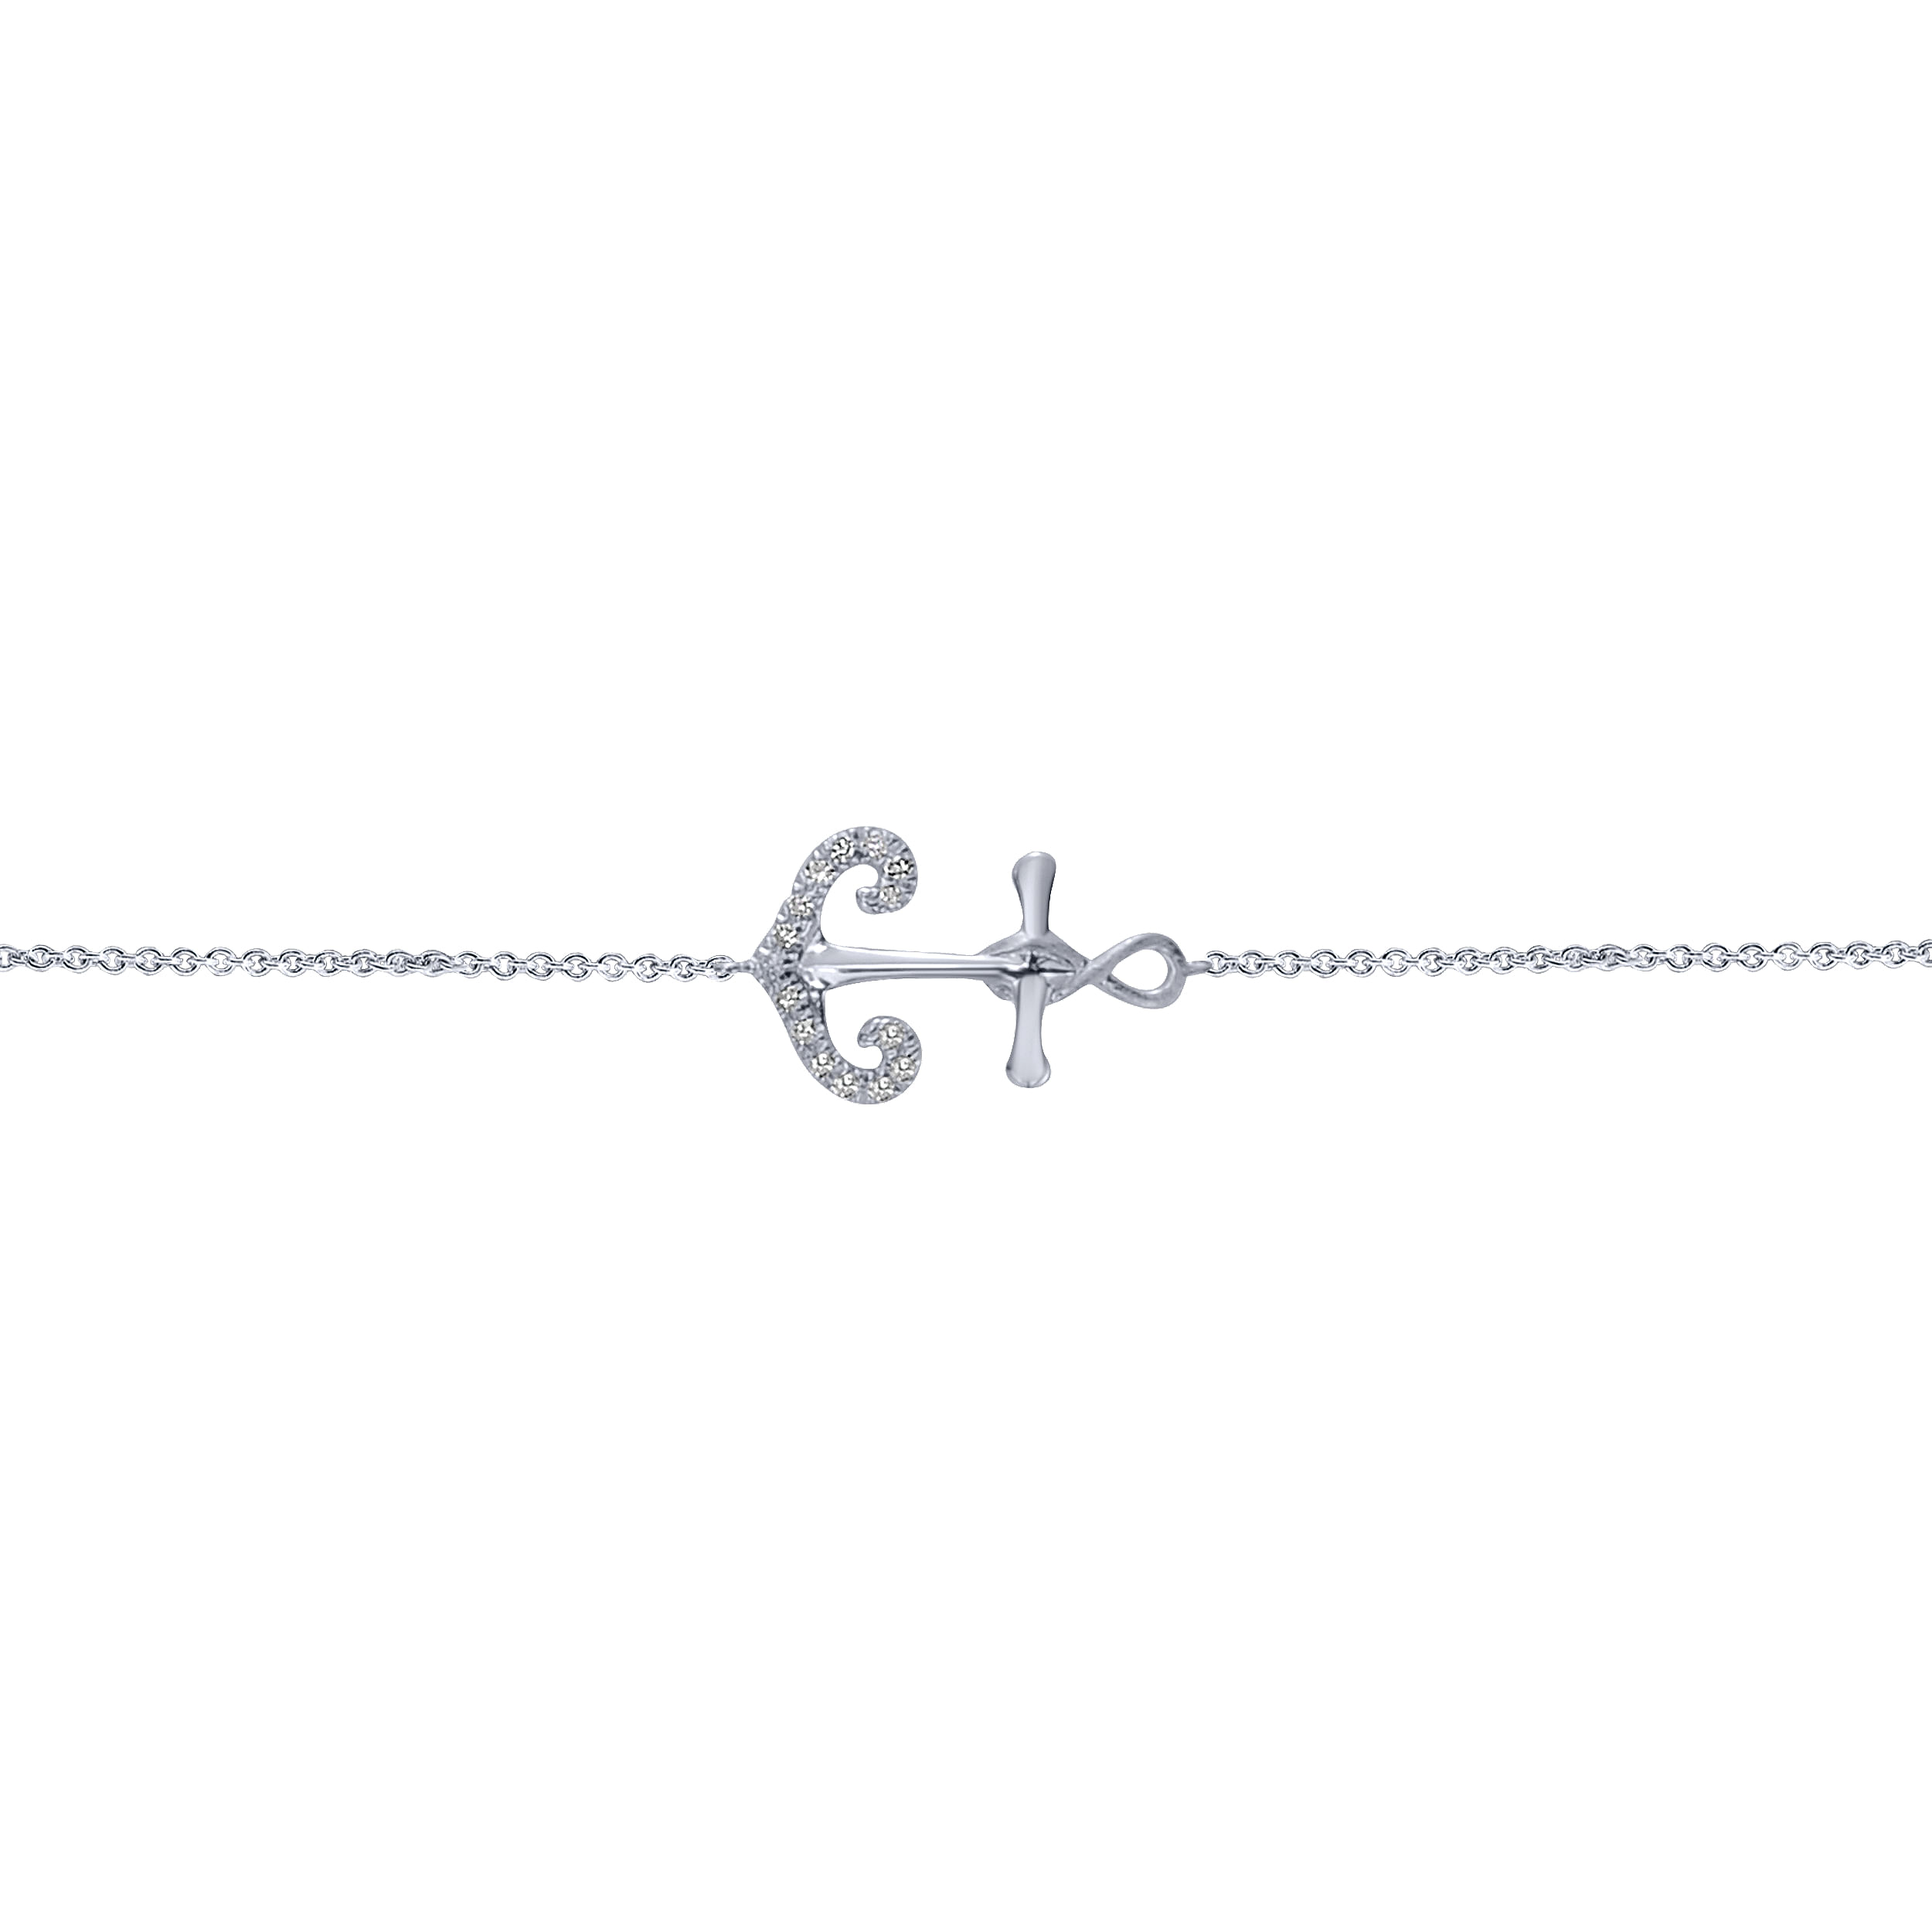 925 Sterling Silver Chain Bracelet with White Sapphire Anchor Charm